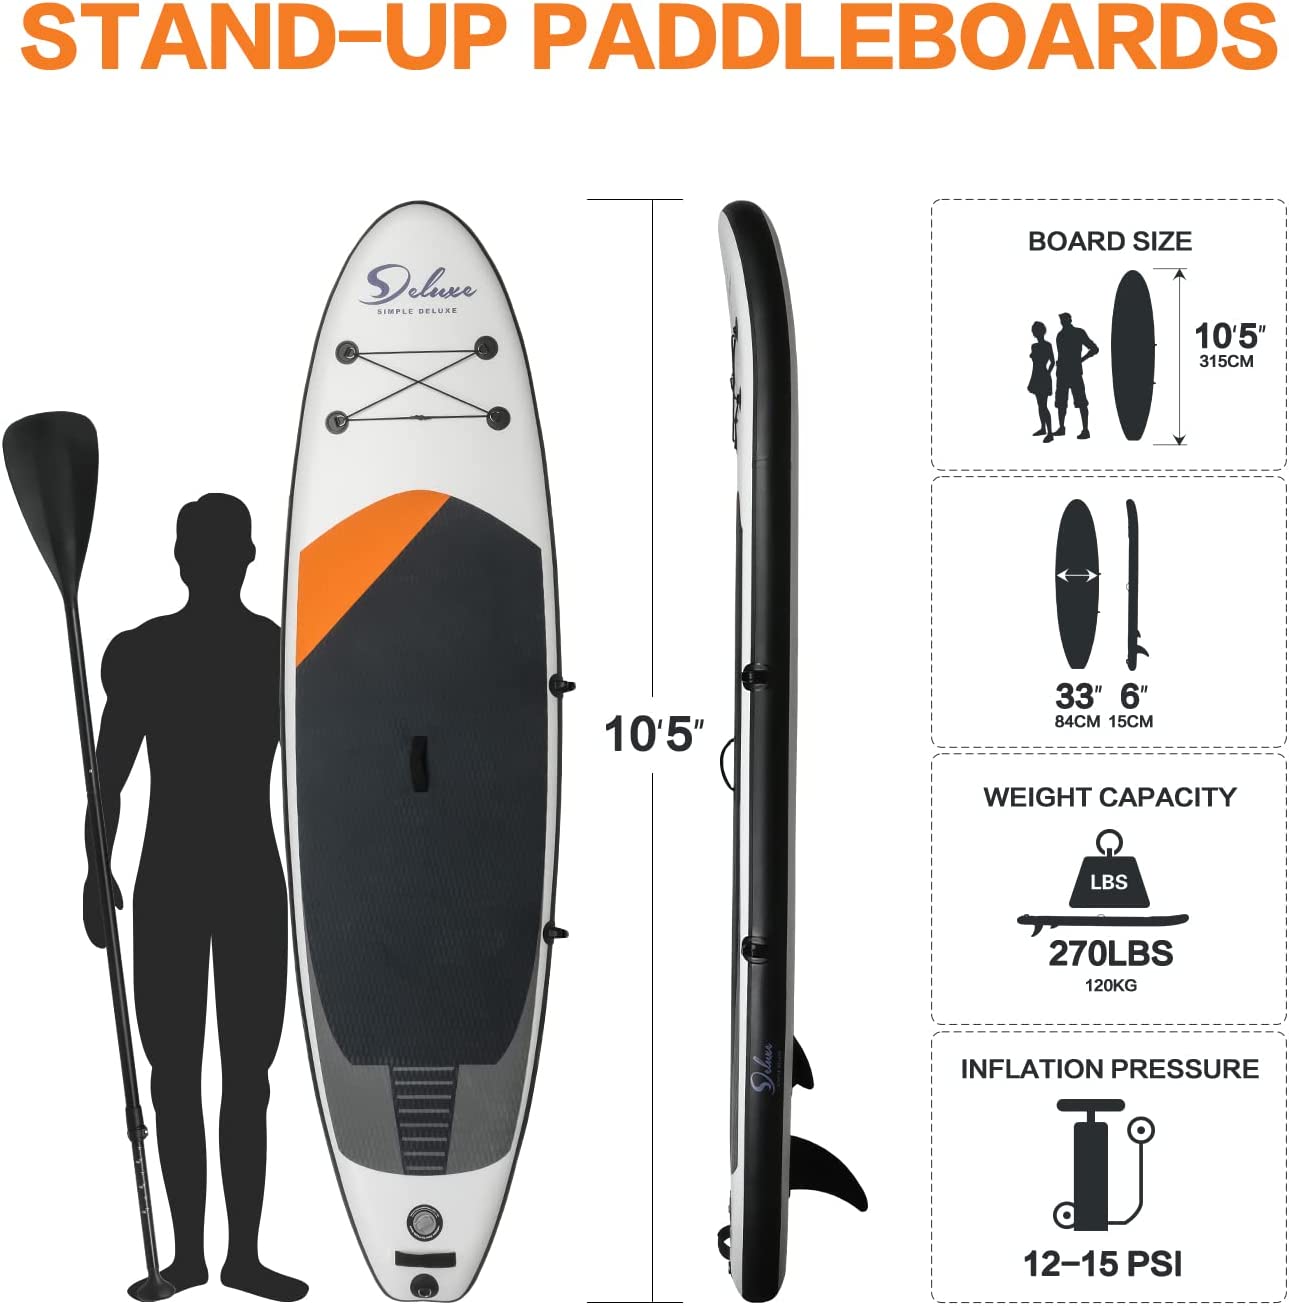 Youth Amp Adults Simple Deluxe Blow Paddle Boards Skill Levels Standing Boat Accessories Amp Backpack-1